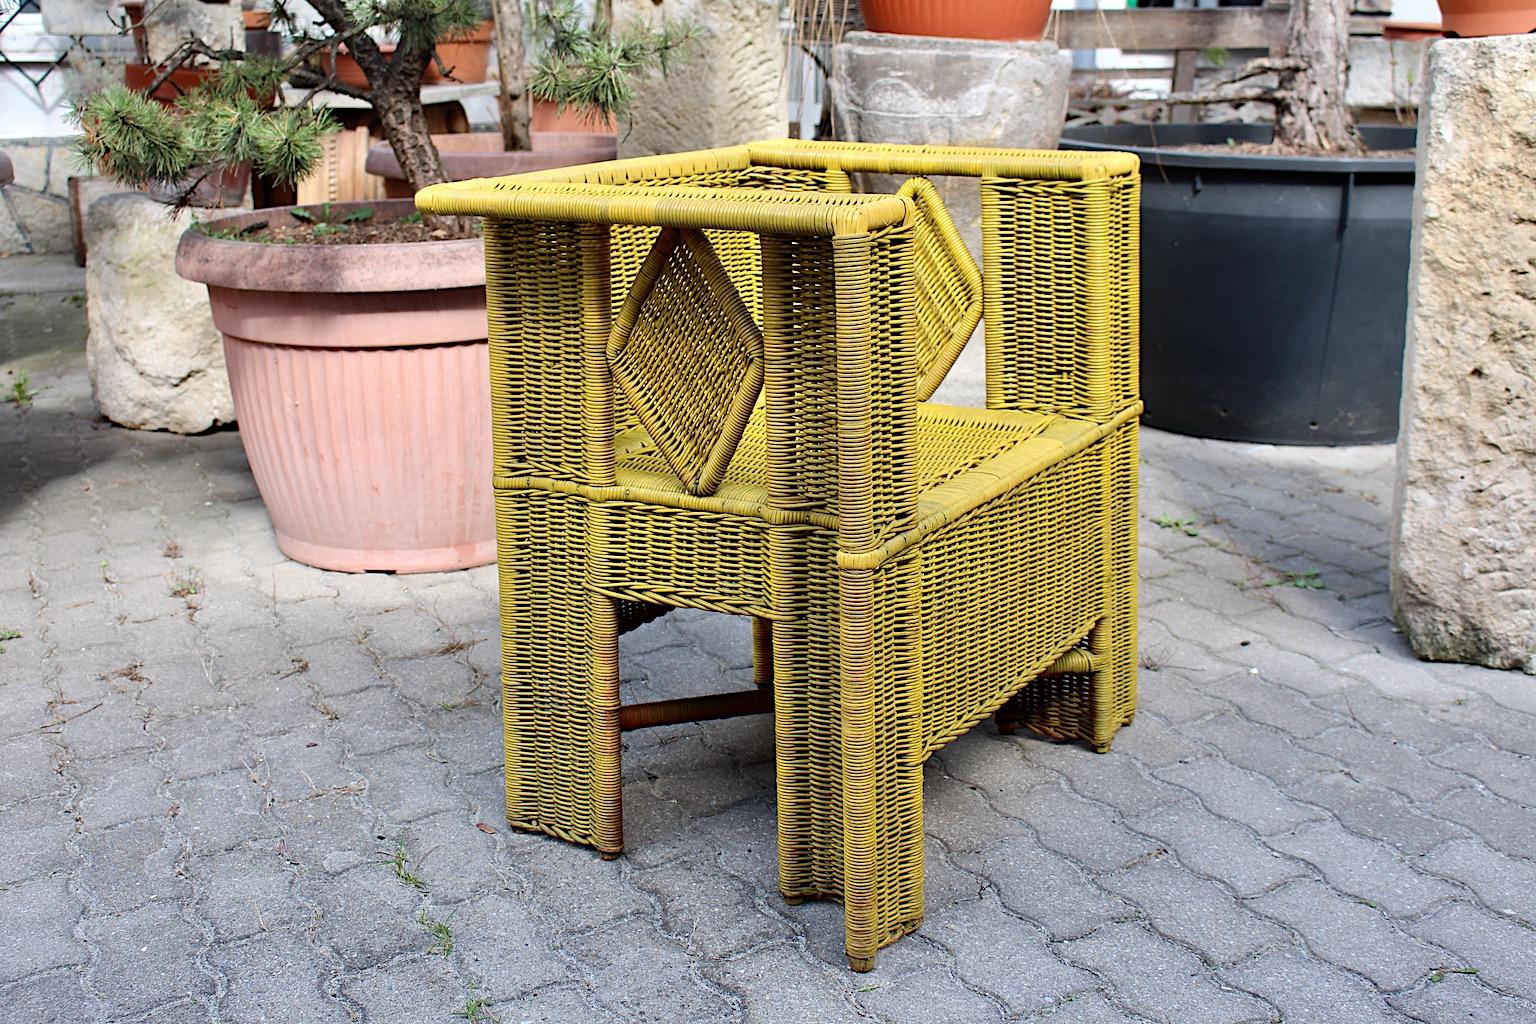 Yellow vintage Jugendstil Secession style patio armchair from rattan designed in the circle of Josef Hoffmann attributed to 
Prag - Rudniker Korbwaren - Fabrikation and manufactured circa 1908 Vienna.
The beautiful cubus square shape with rhombic